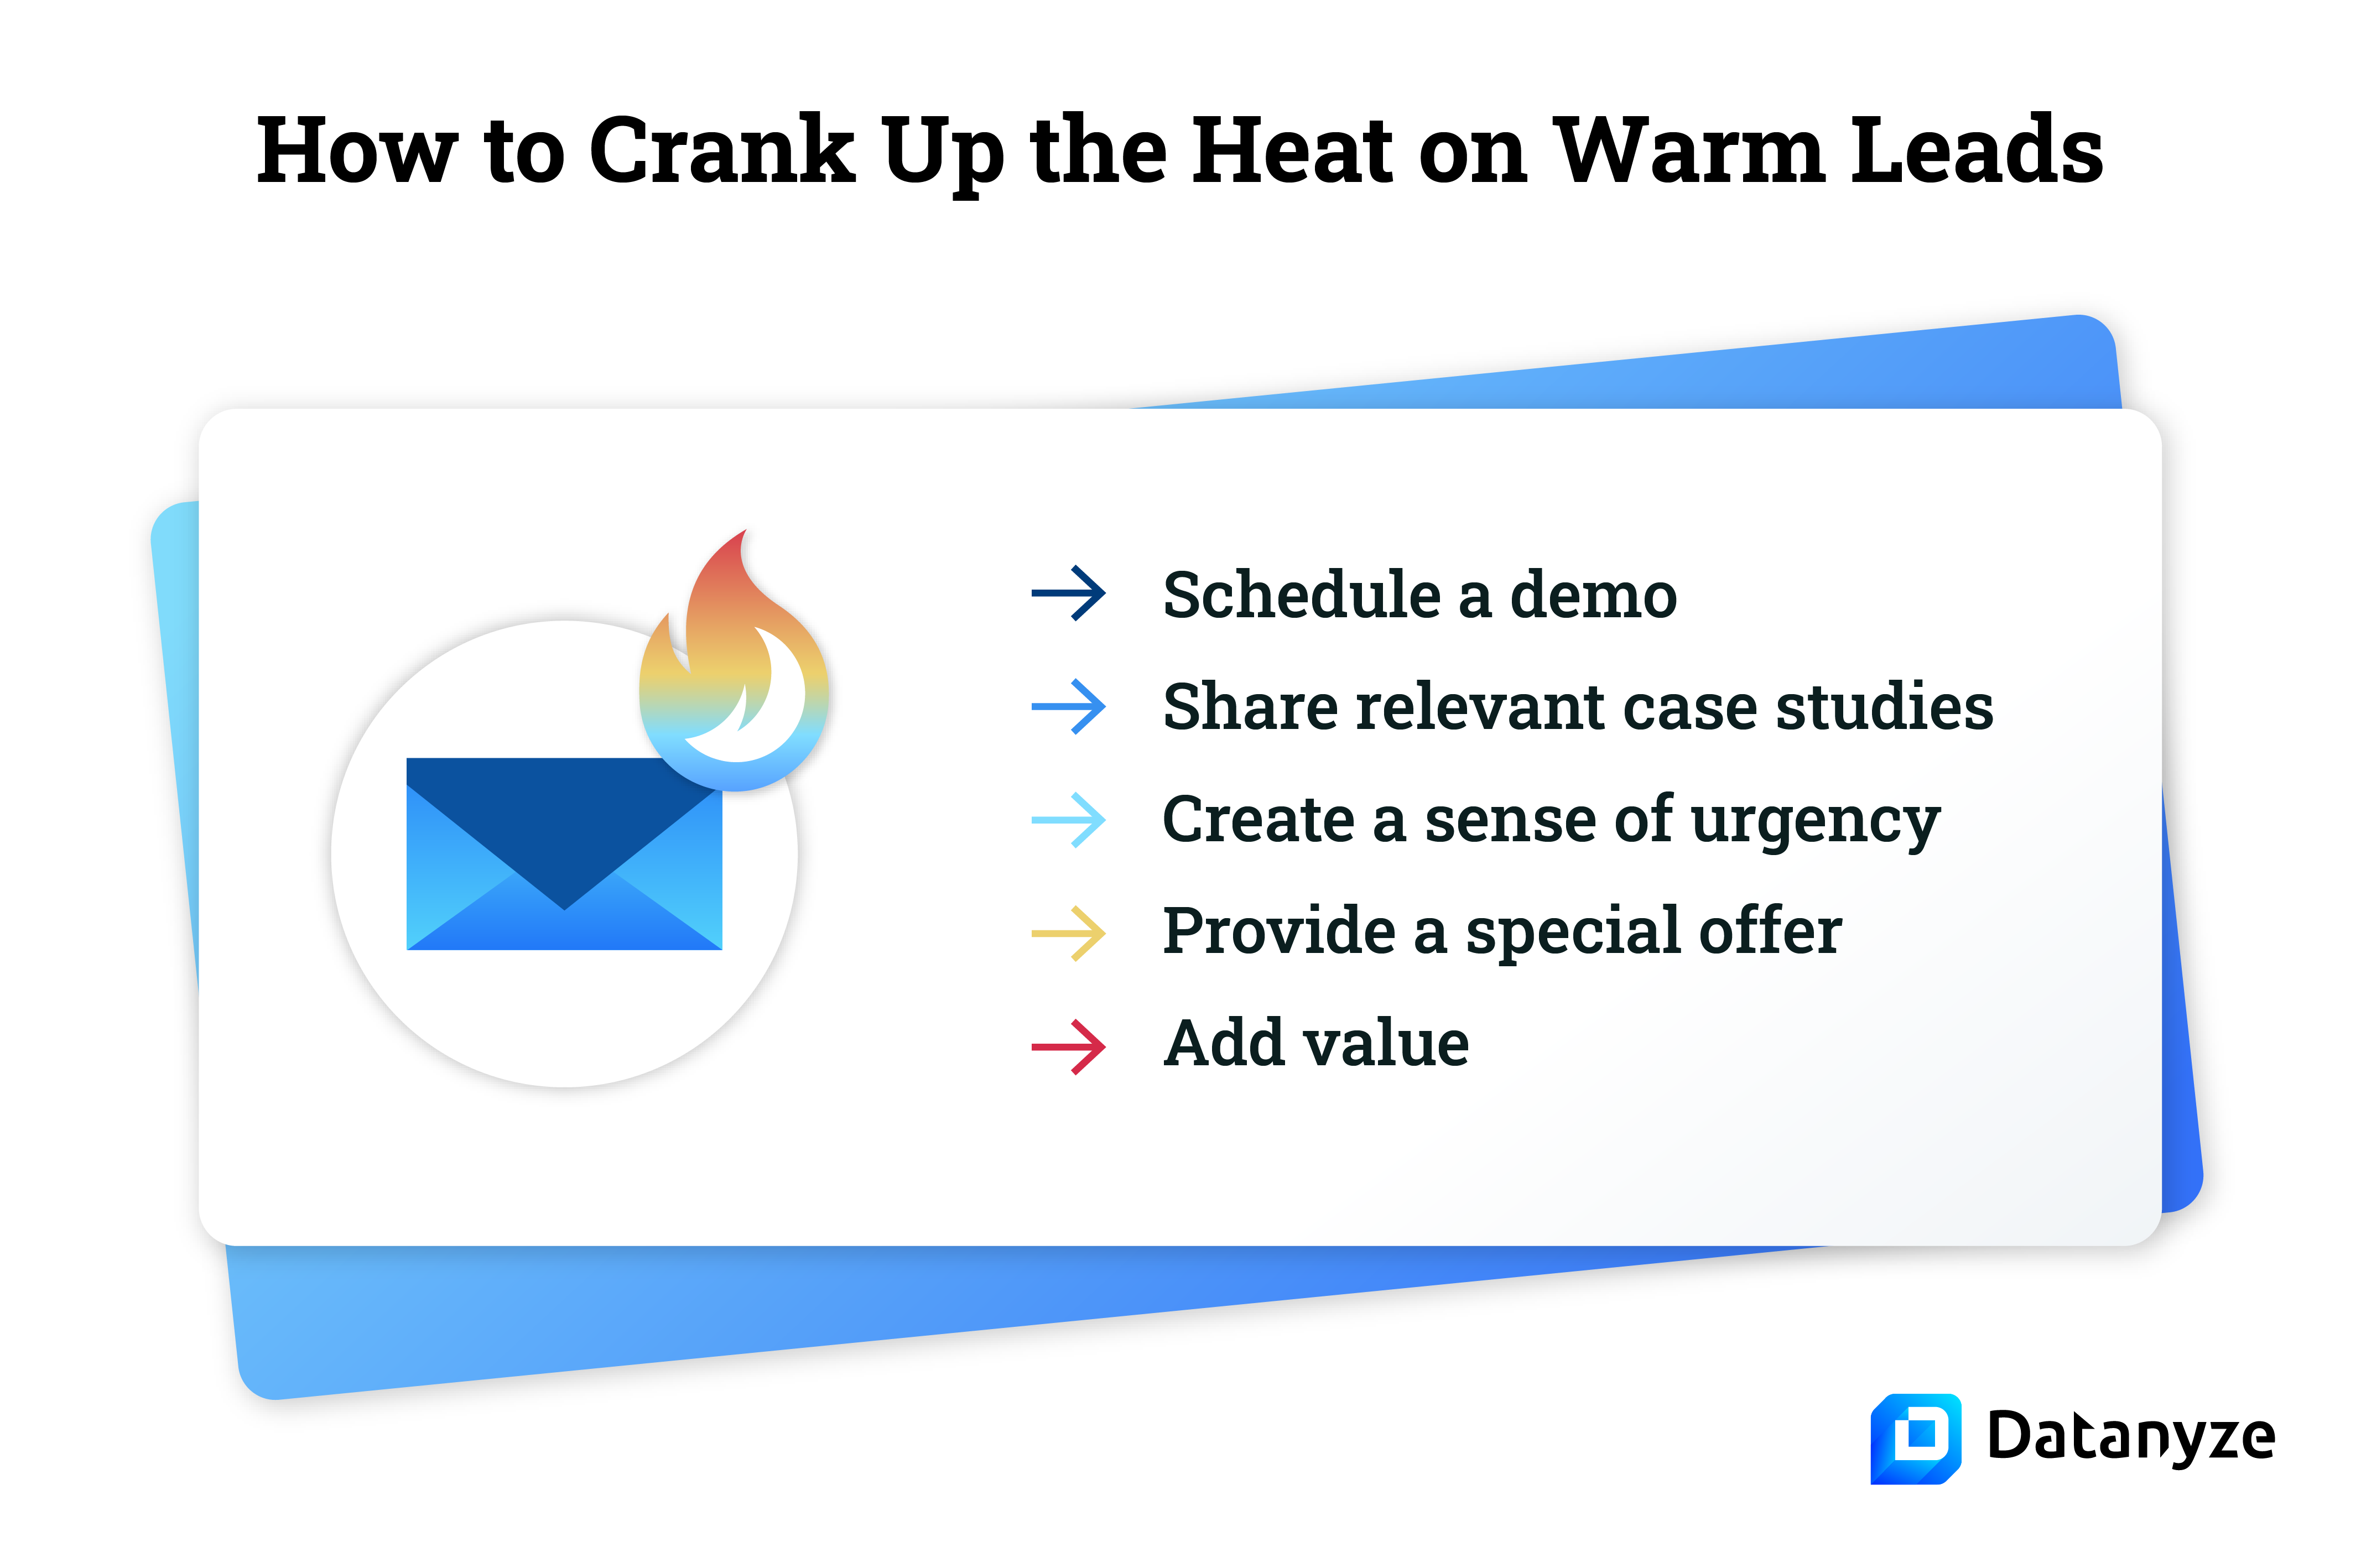 Lead Nurturing: How to Turn Warm Leads Into Hot Leads